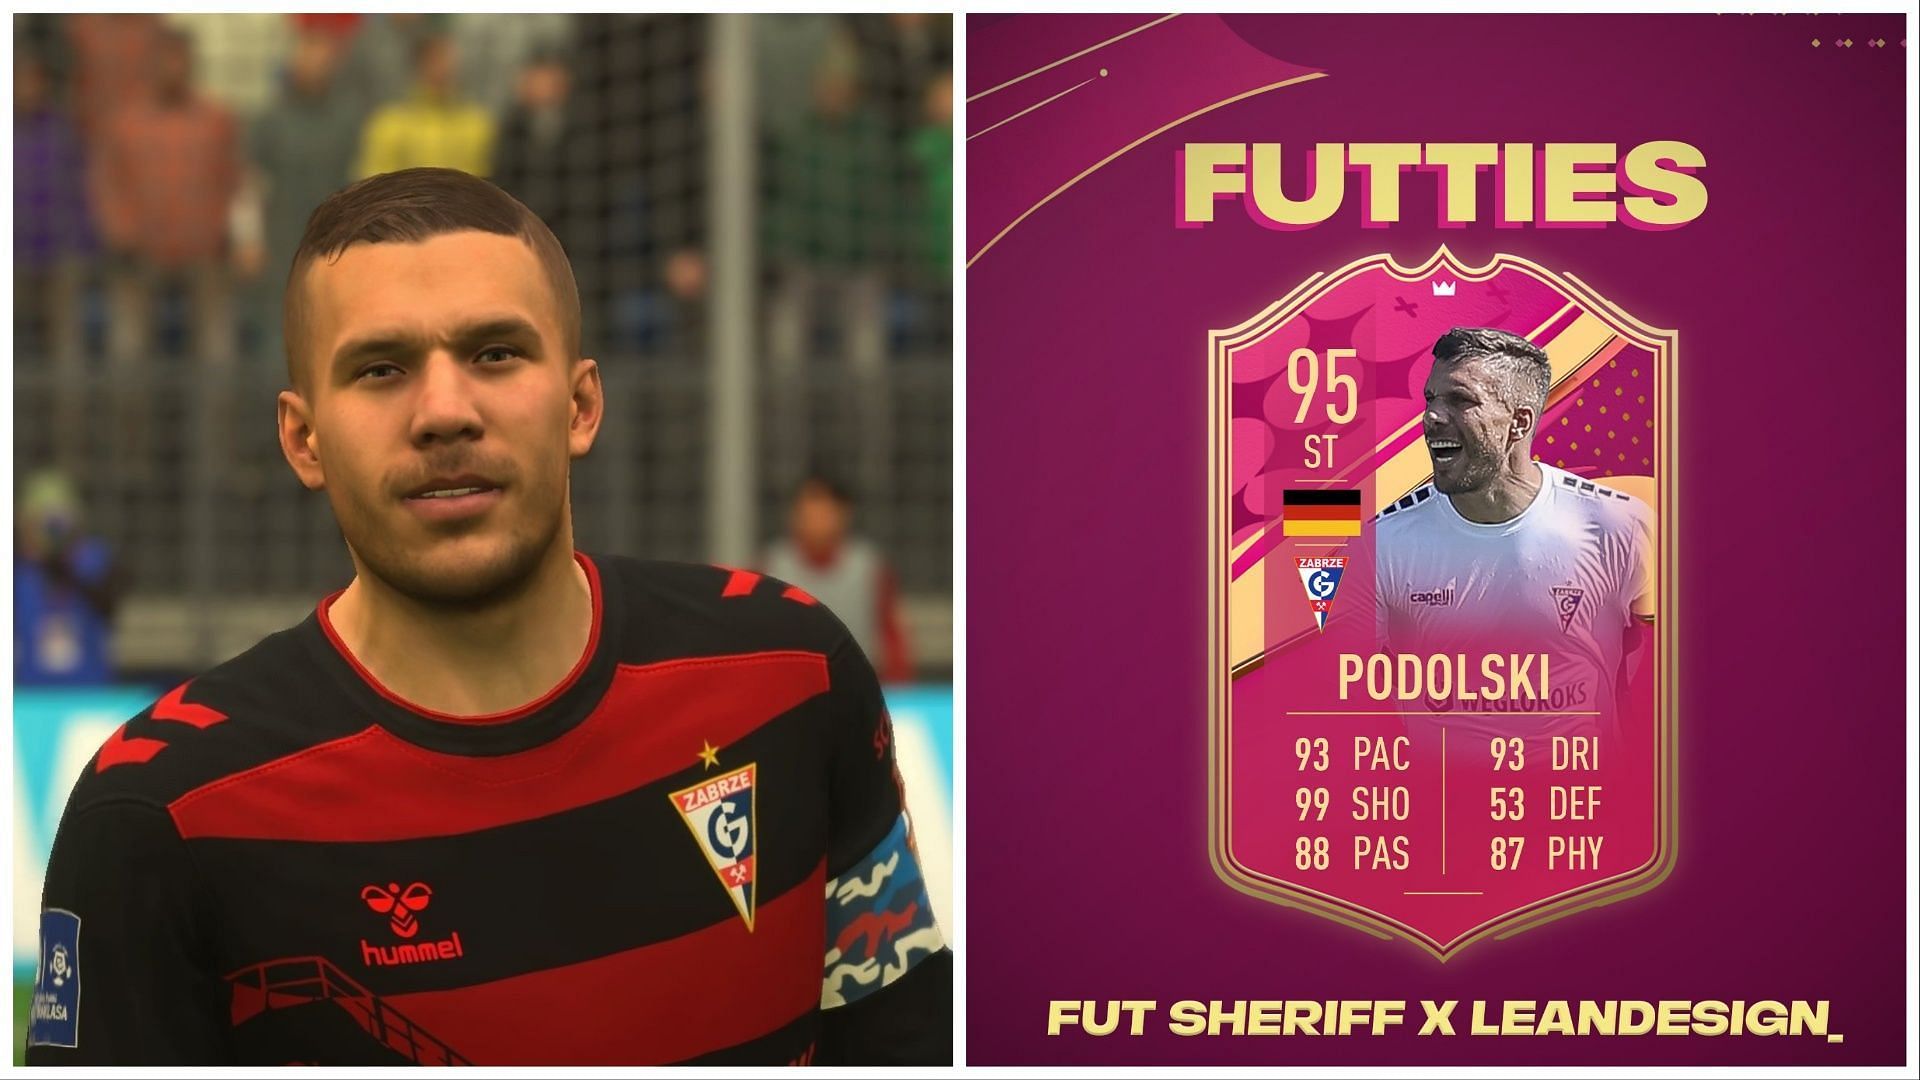 FUTTIES Podolski has been leaked (Images via EA Sports and Twitter/FUT Sheriff)